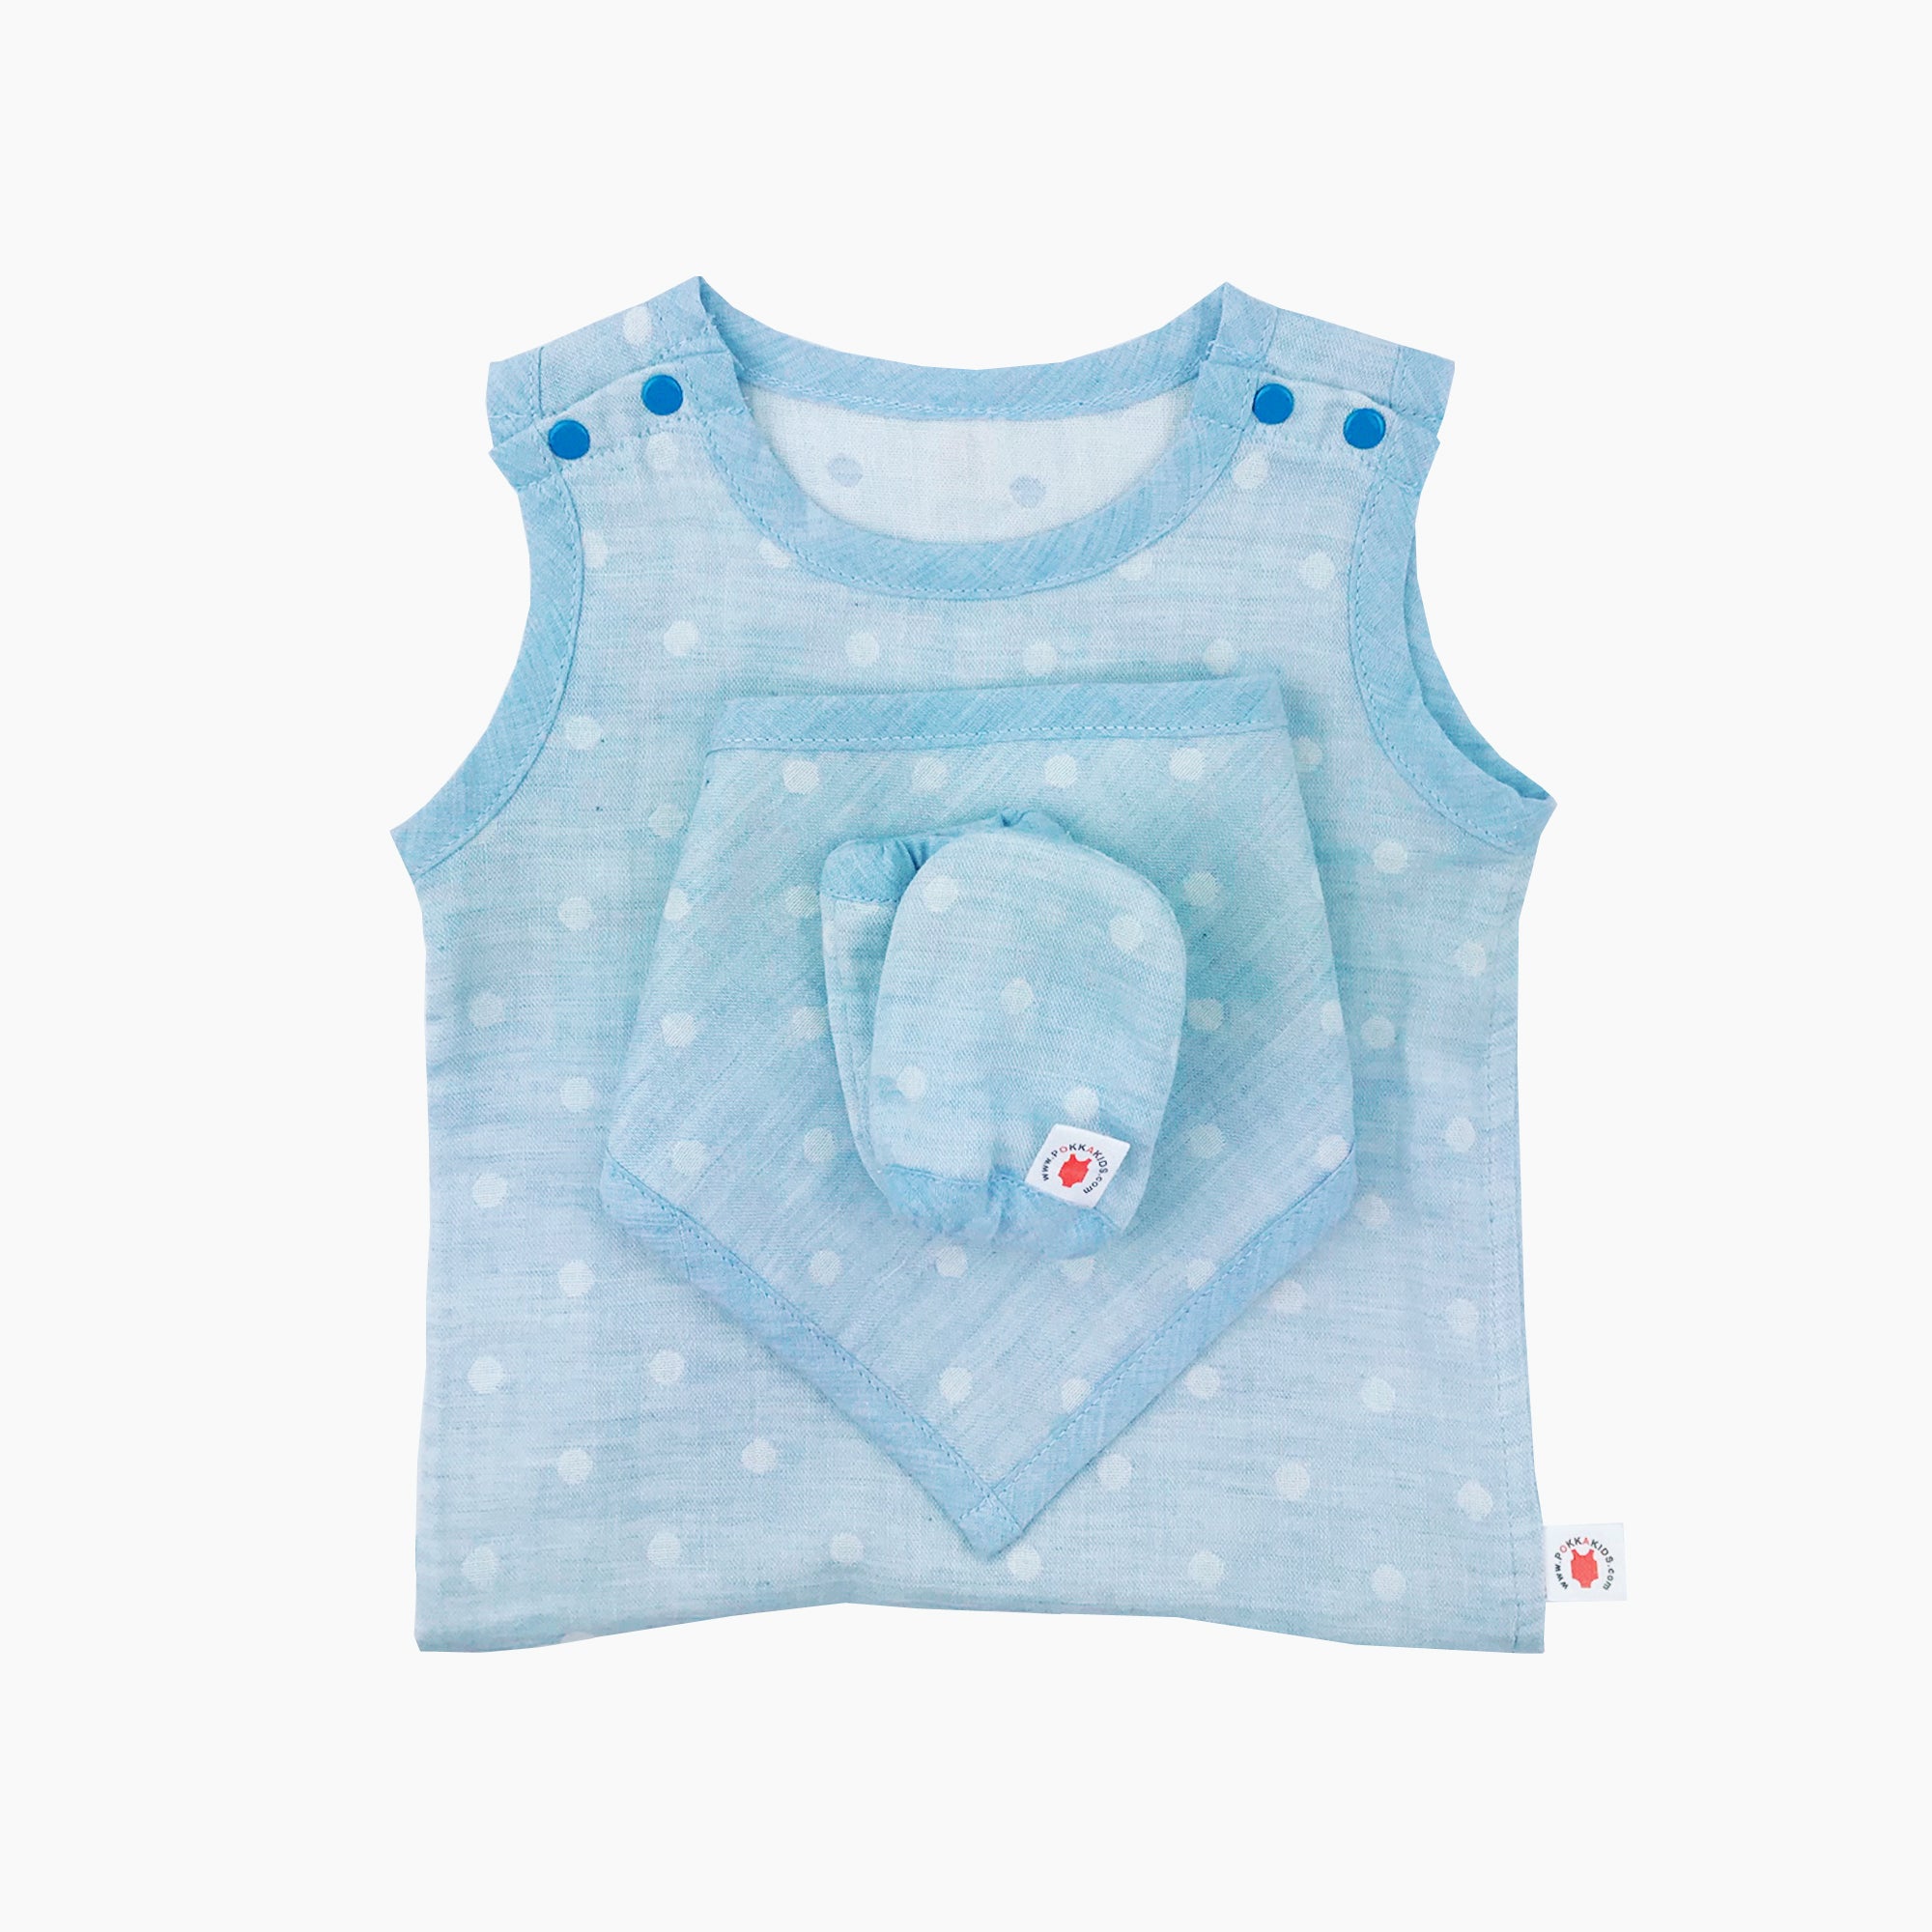 GOTS certified organic cotton baby gift includes bodysuit, bandana bib, and mittens for eczema in blue color